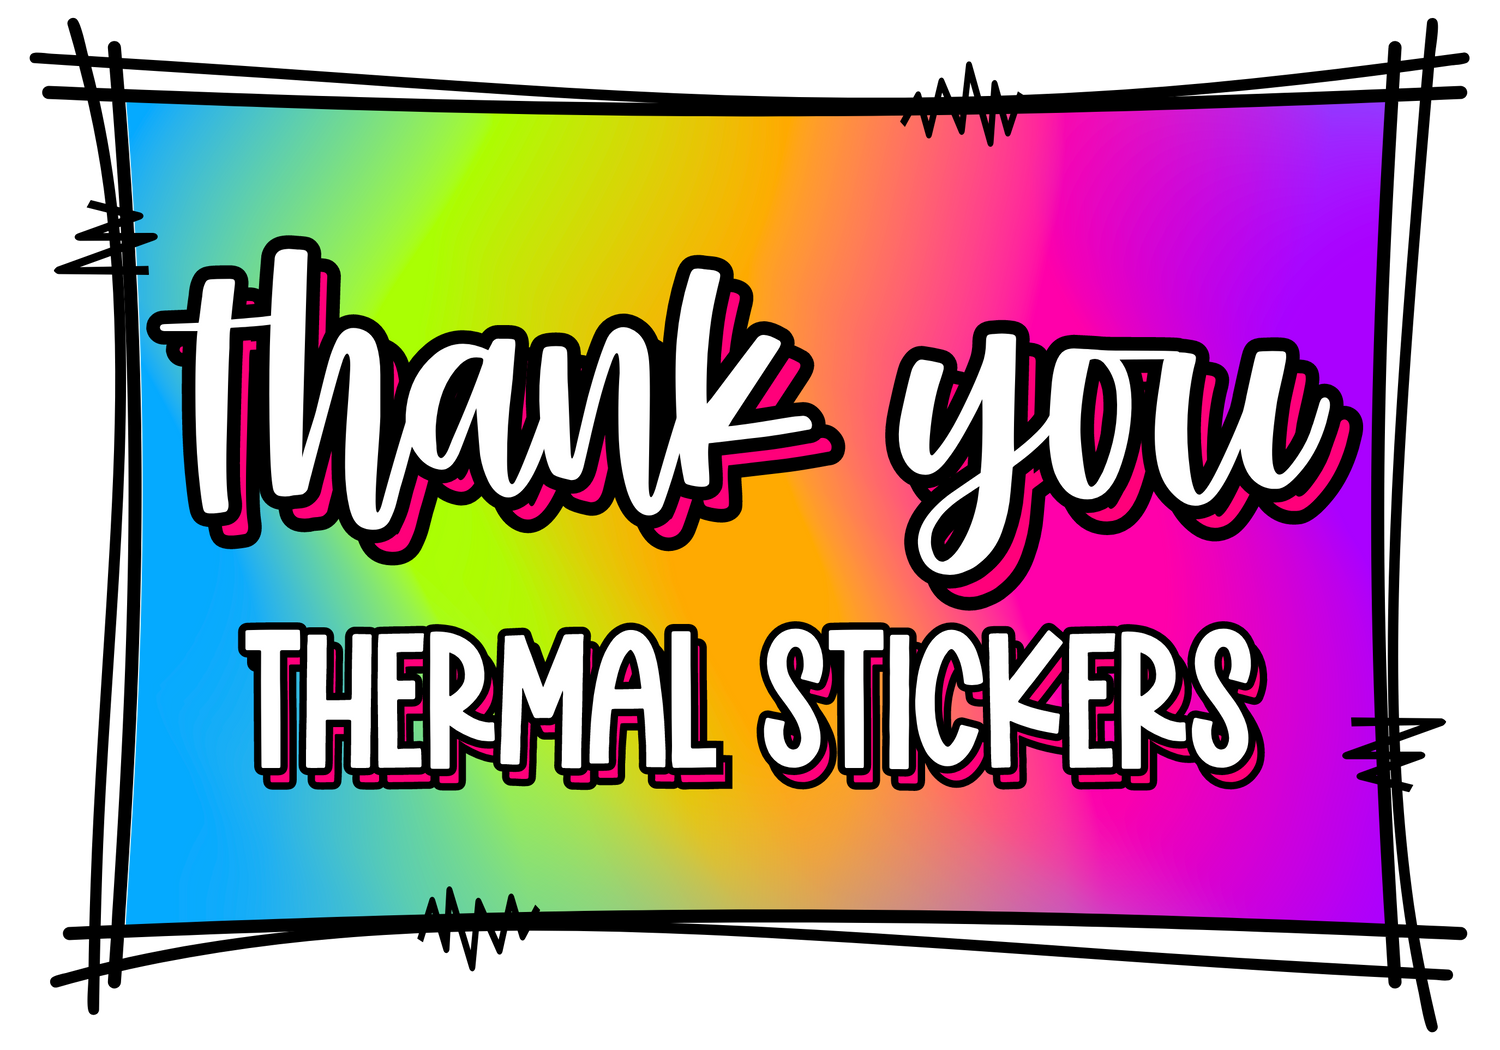 Thank You Small Business Thermal Stickers